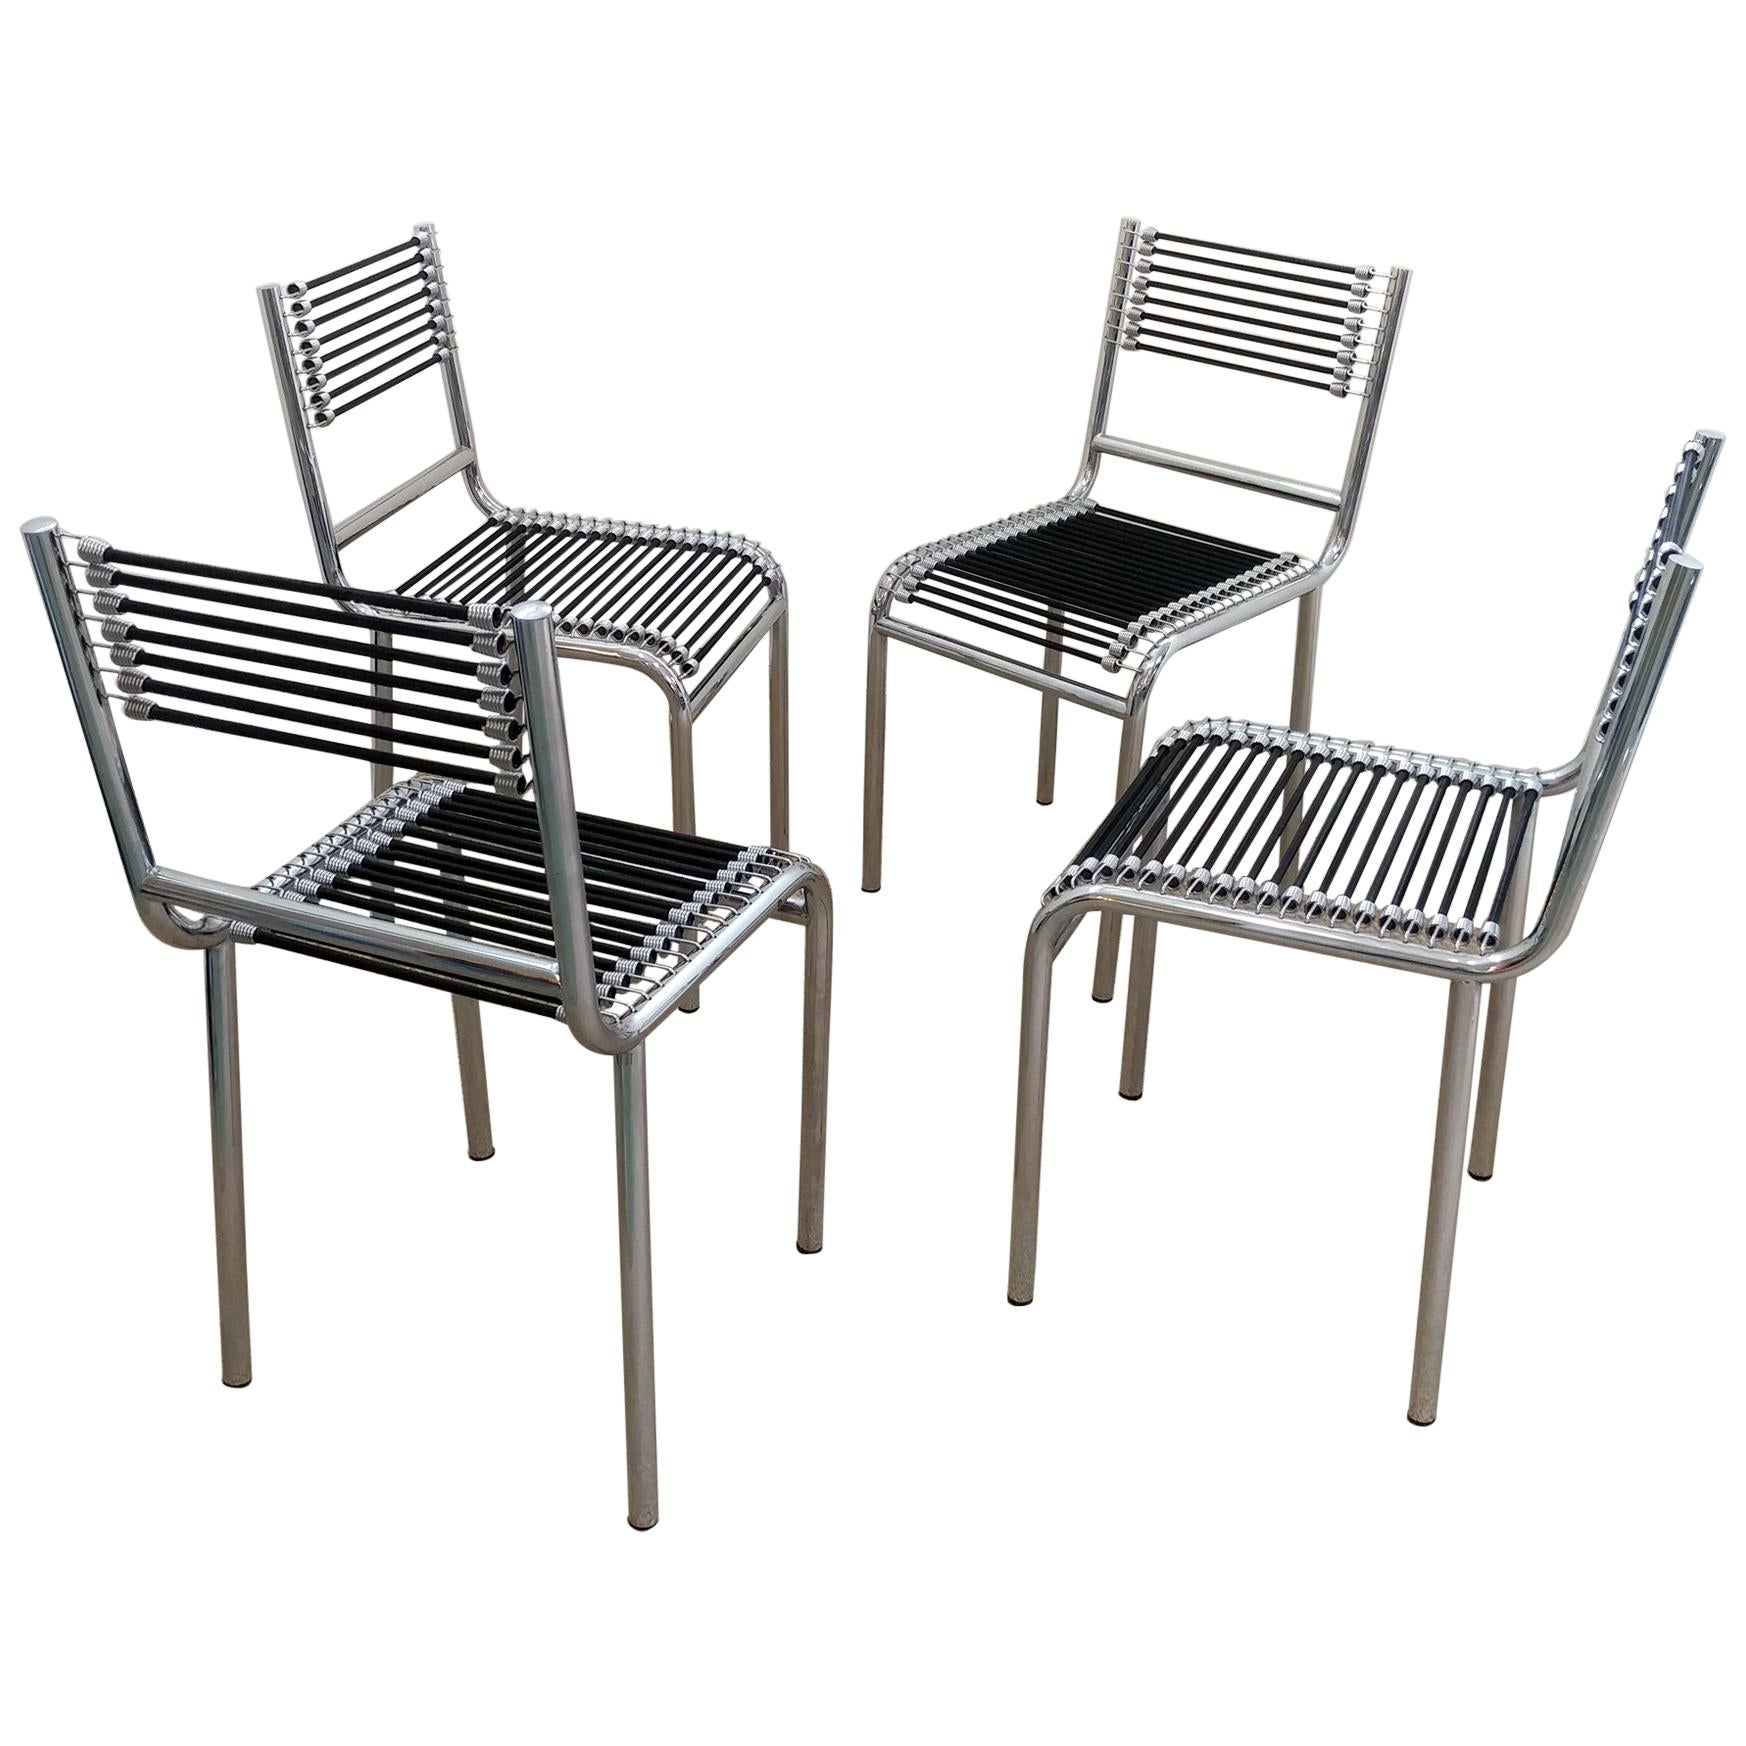 Rene Herbst Sandows Chairs, Offered by La Porte